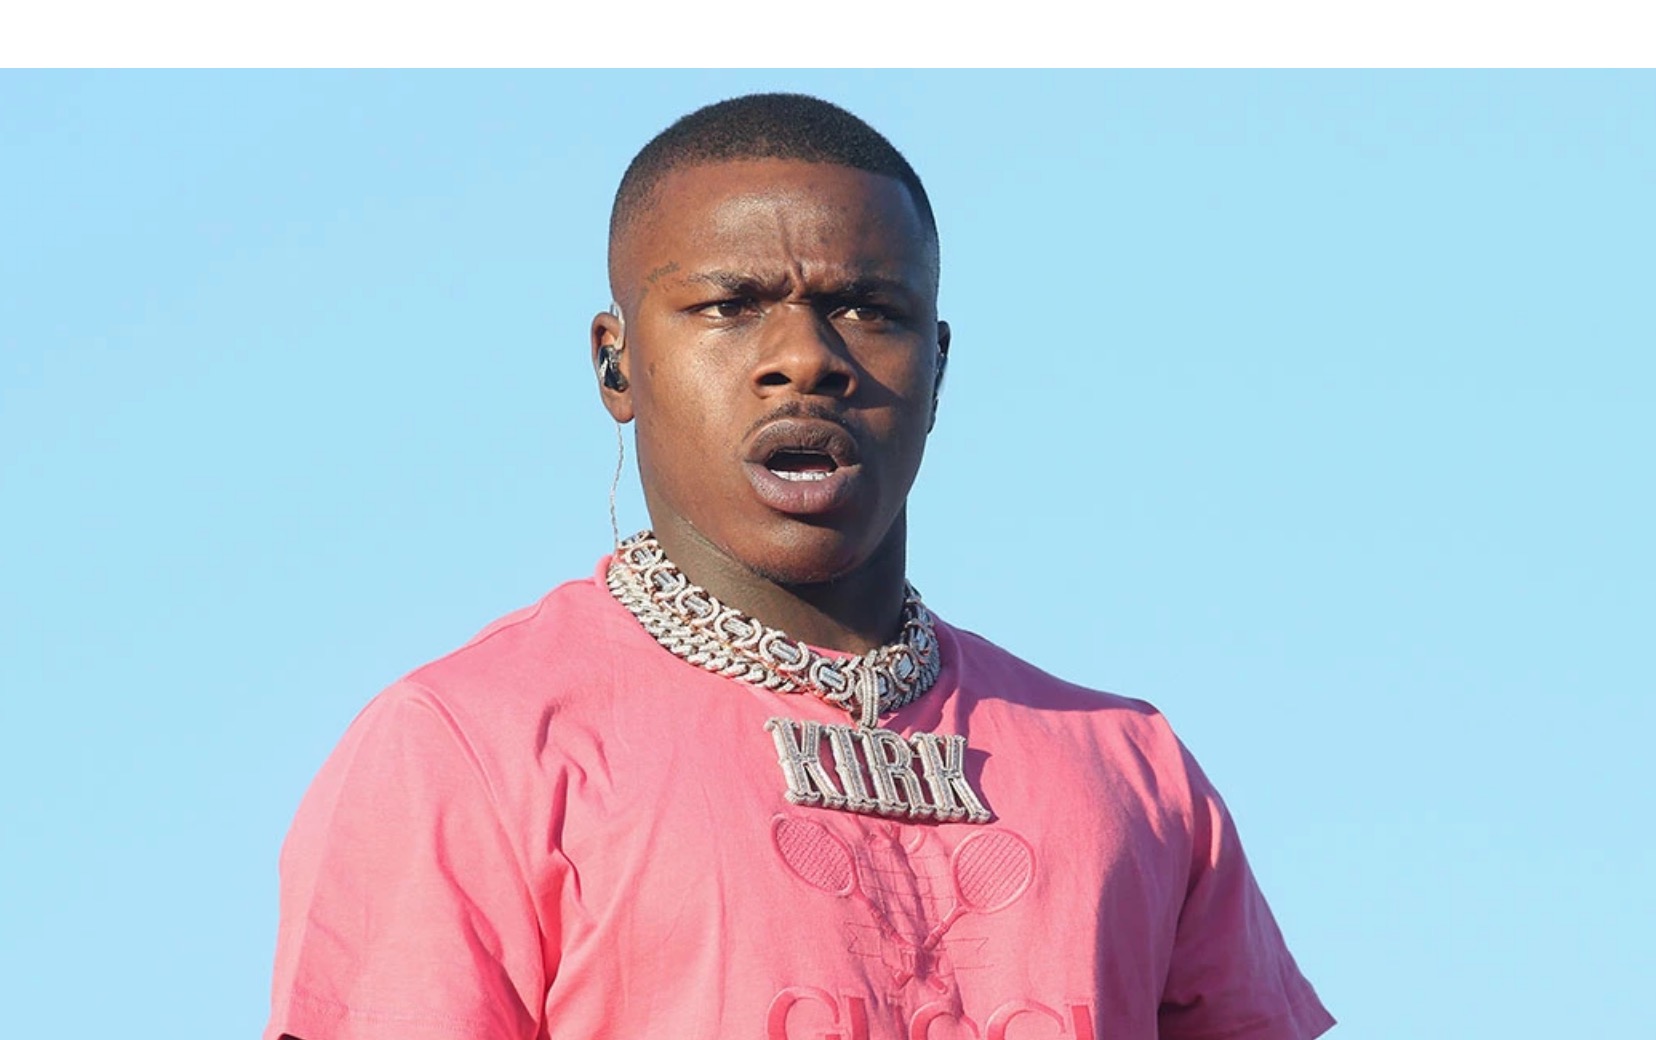 Lawsuit Filed Against DaBaby After He Allegedly Damaged Fan at Tampa Bay Show